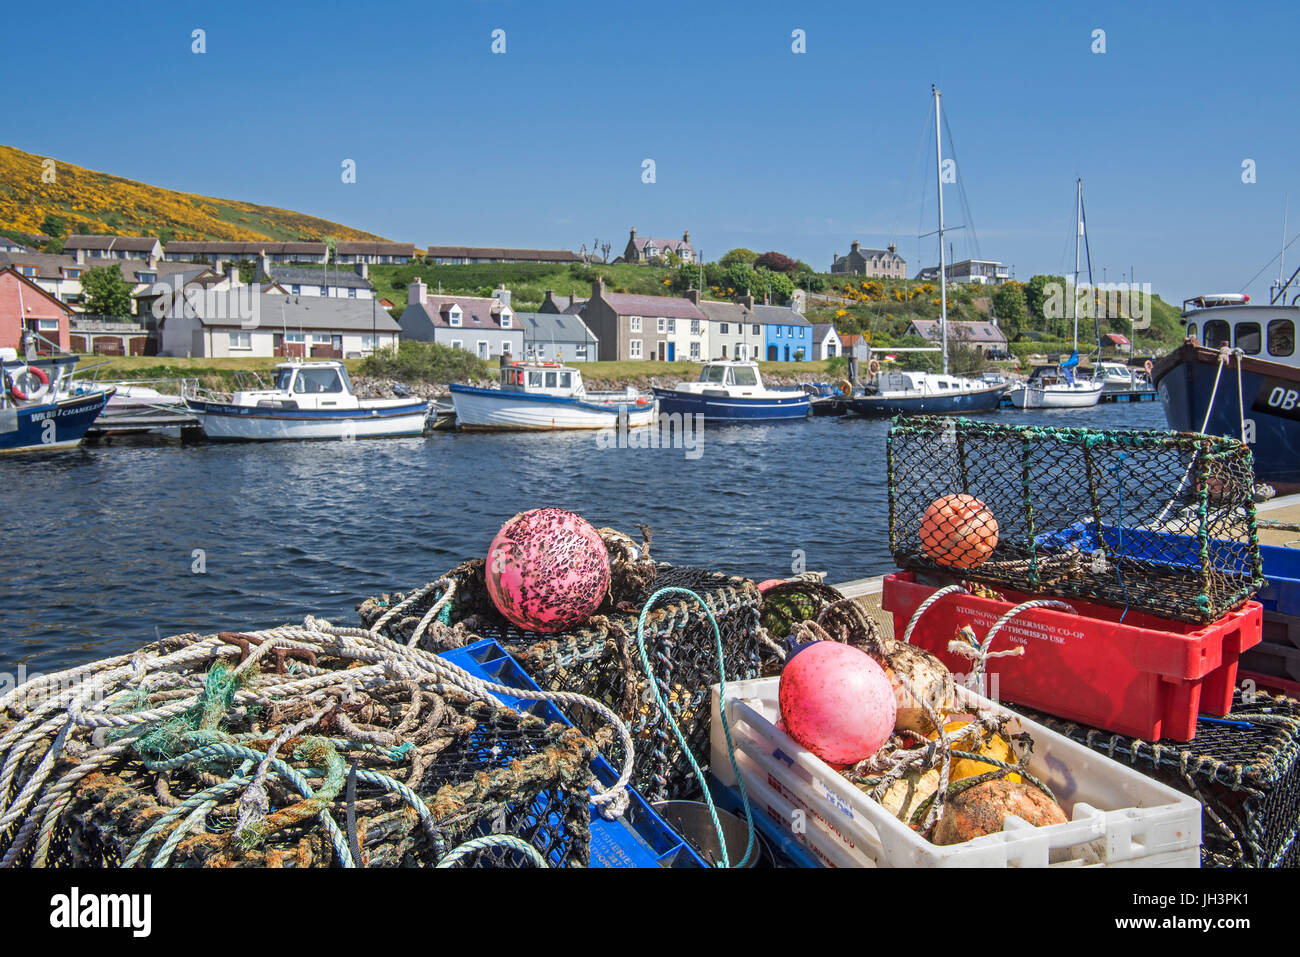 Lobster creels / traps on quay and fishing boats in the harbour of Helmsdale, Sutherland, Scottish Highlands, Scotland, UK Stock Photo